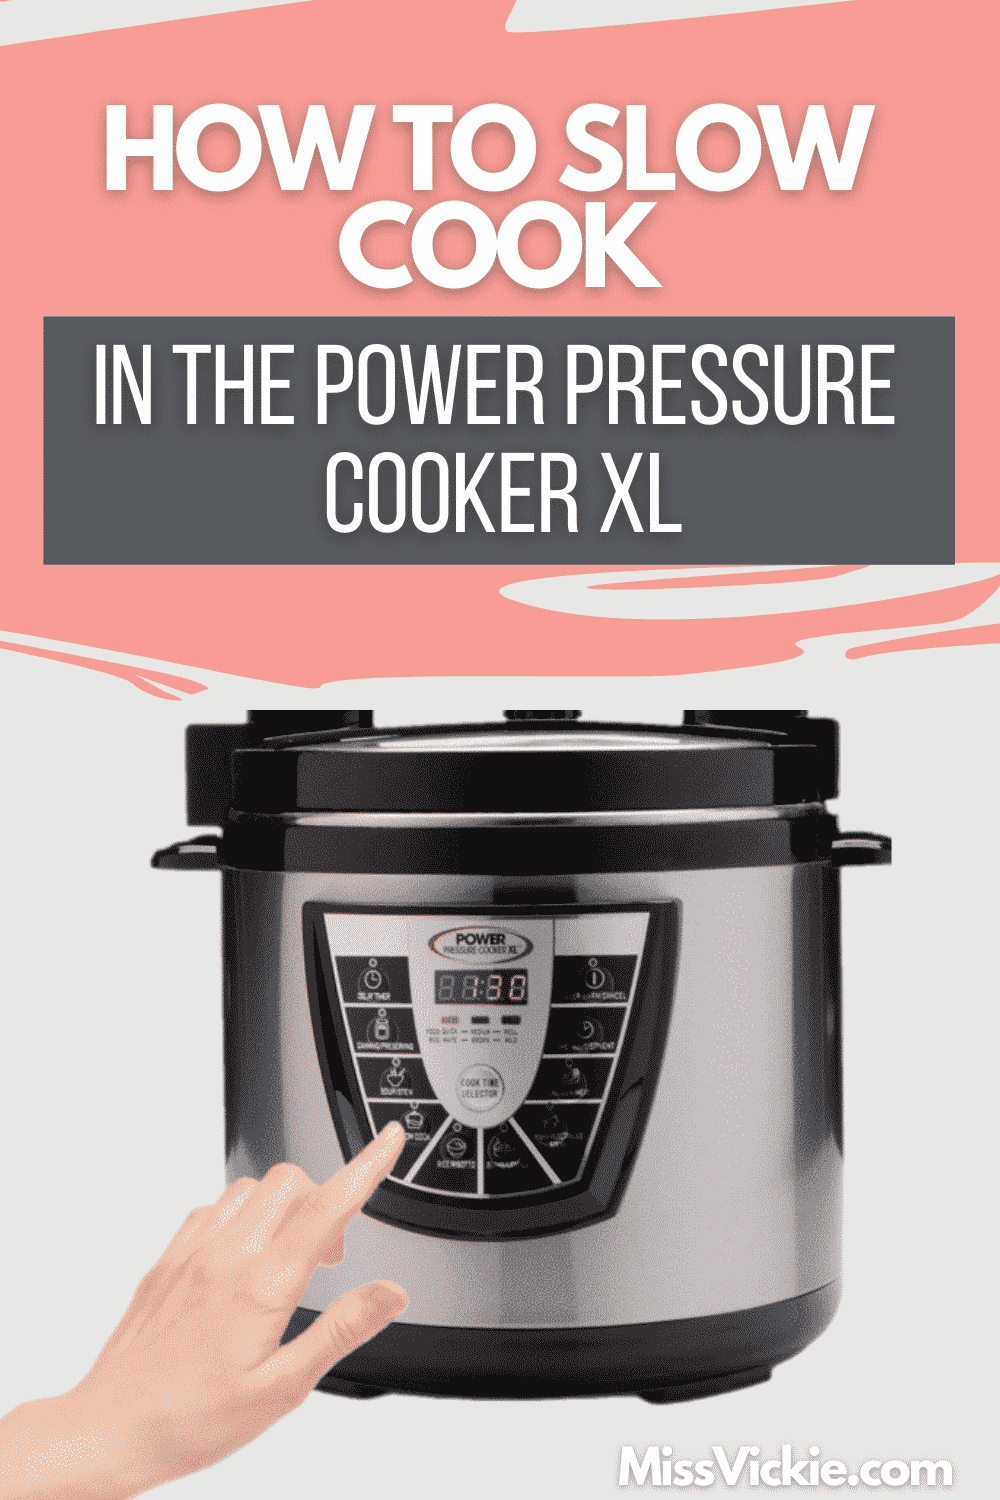 How To Slow Cook In The Power Pressure Cooker XL - Miss Vickie